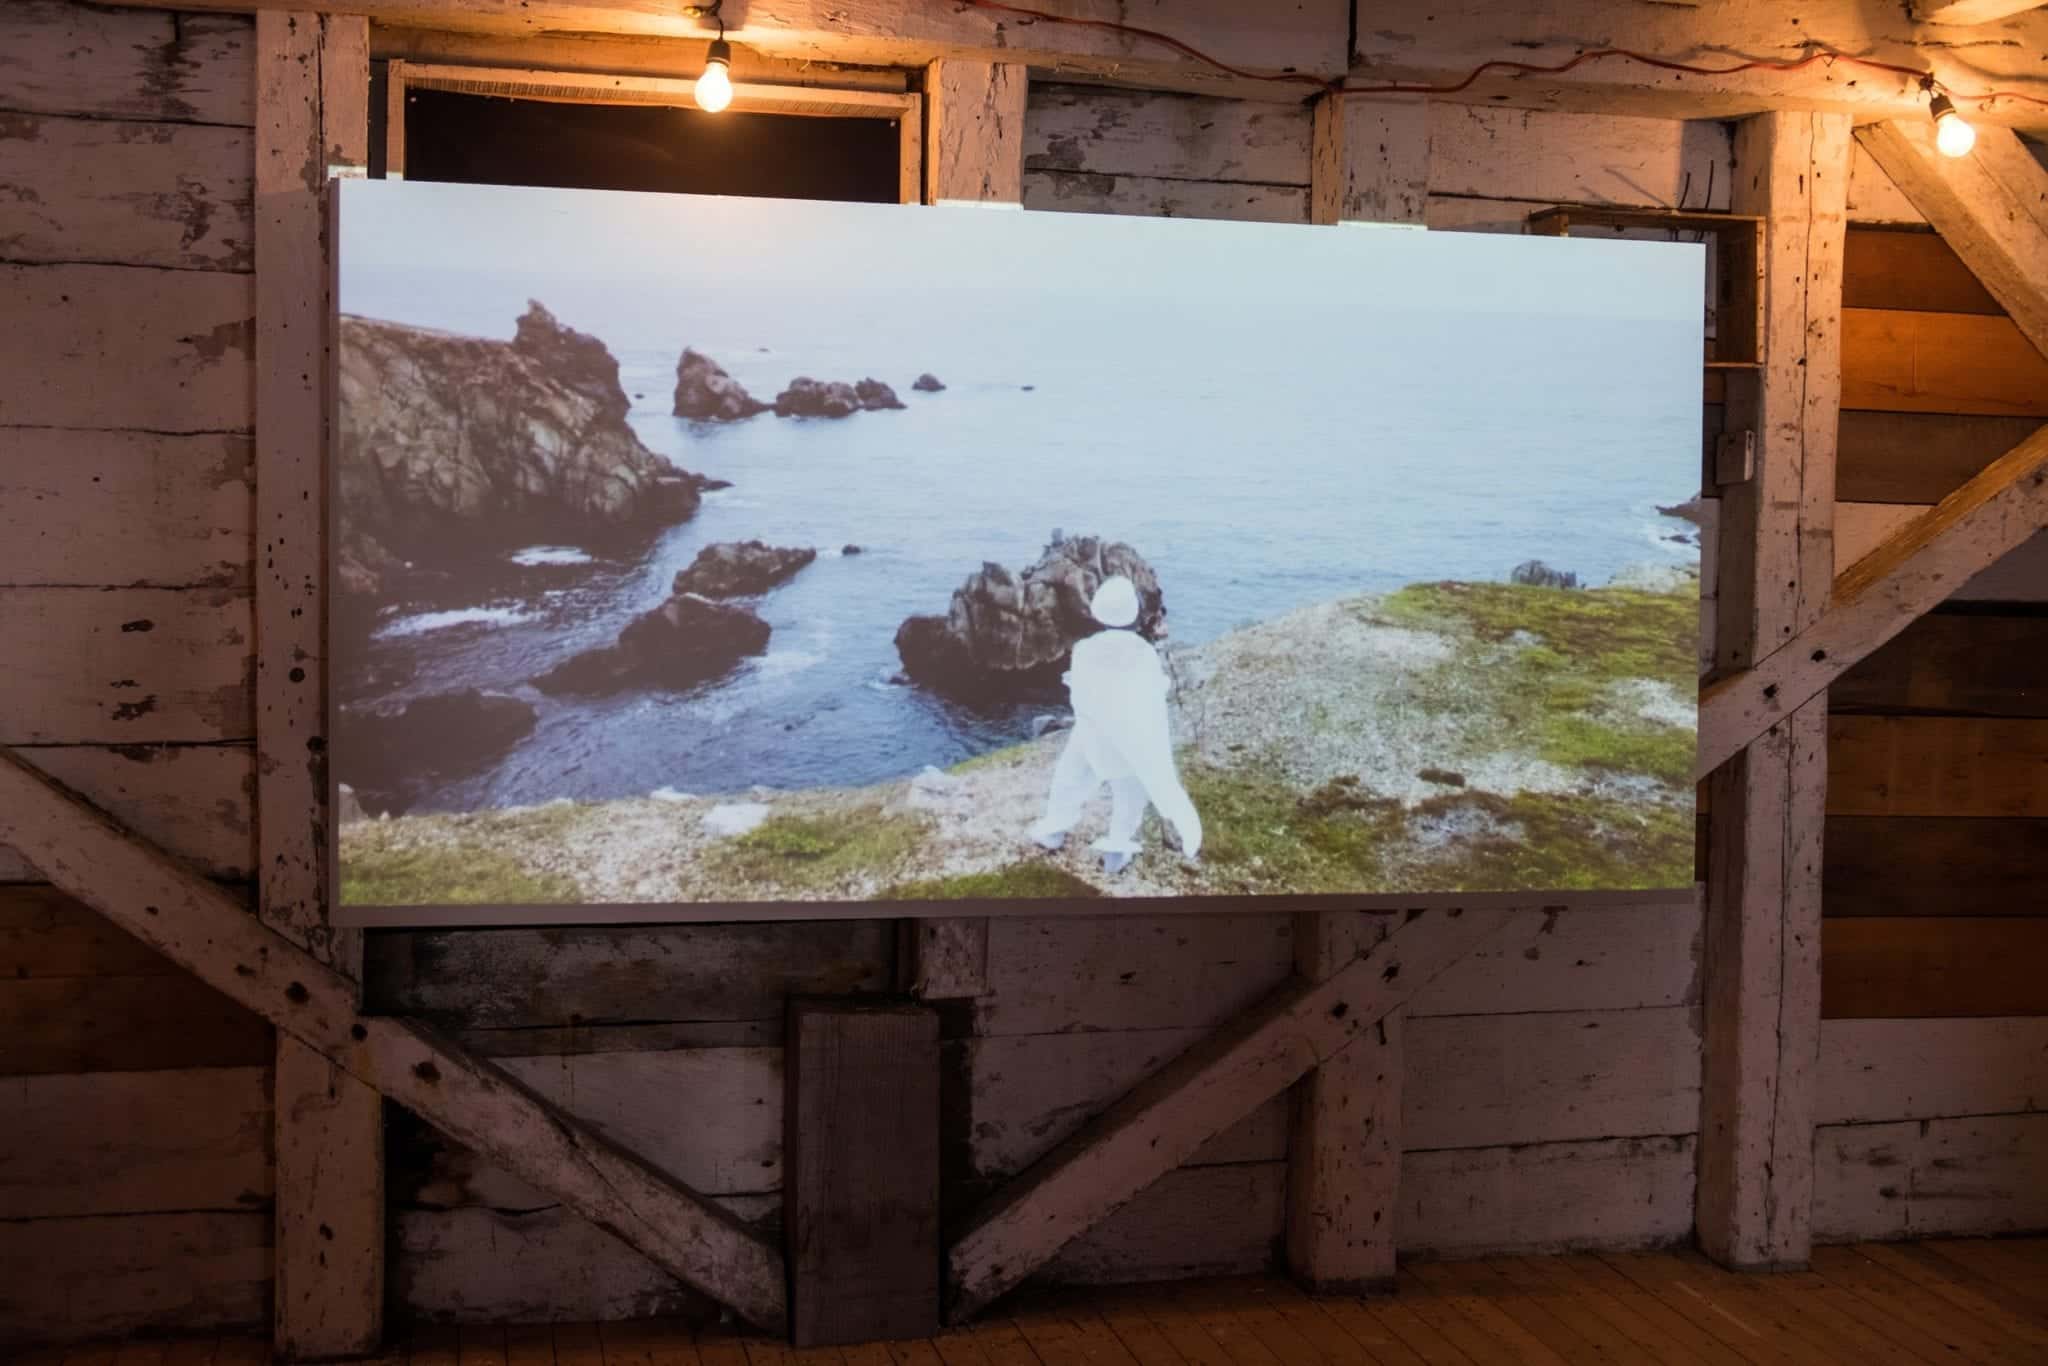 A screen with a woman in white African costume and a turban, standing on the edge of a cliff in Newfoundland.